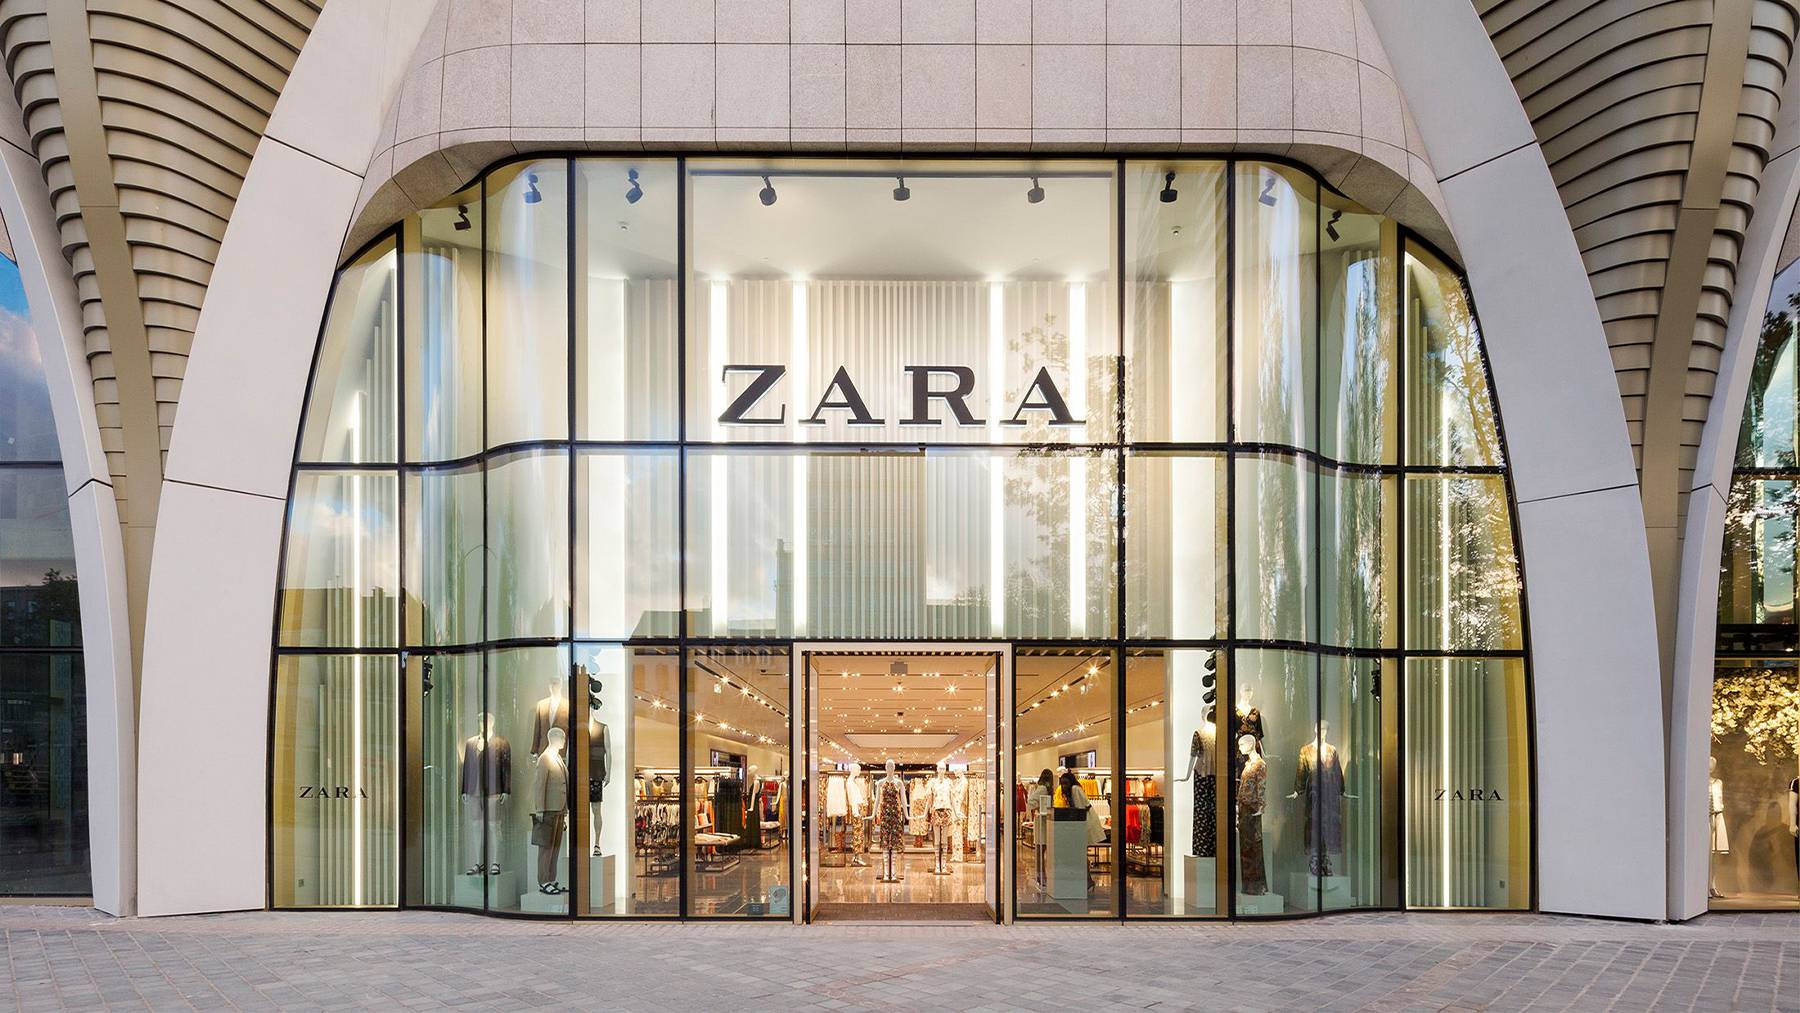 Zara owner names founder’s daughter chairwoman in generational shift.